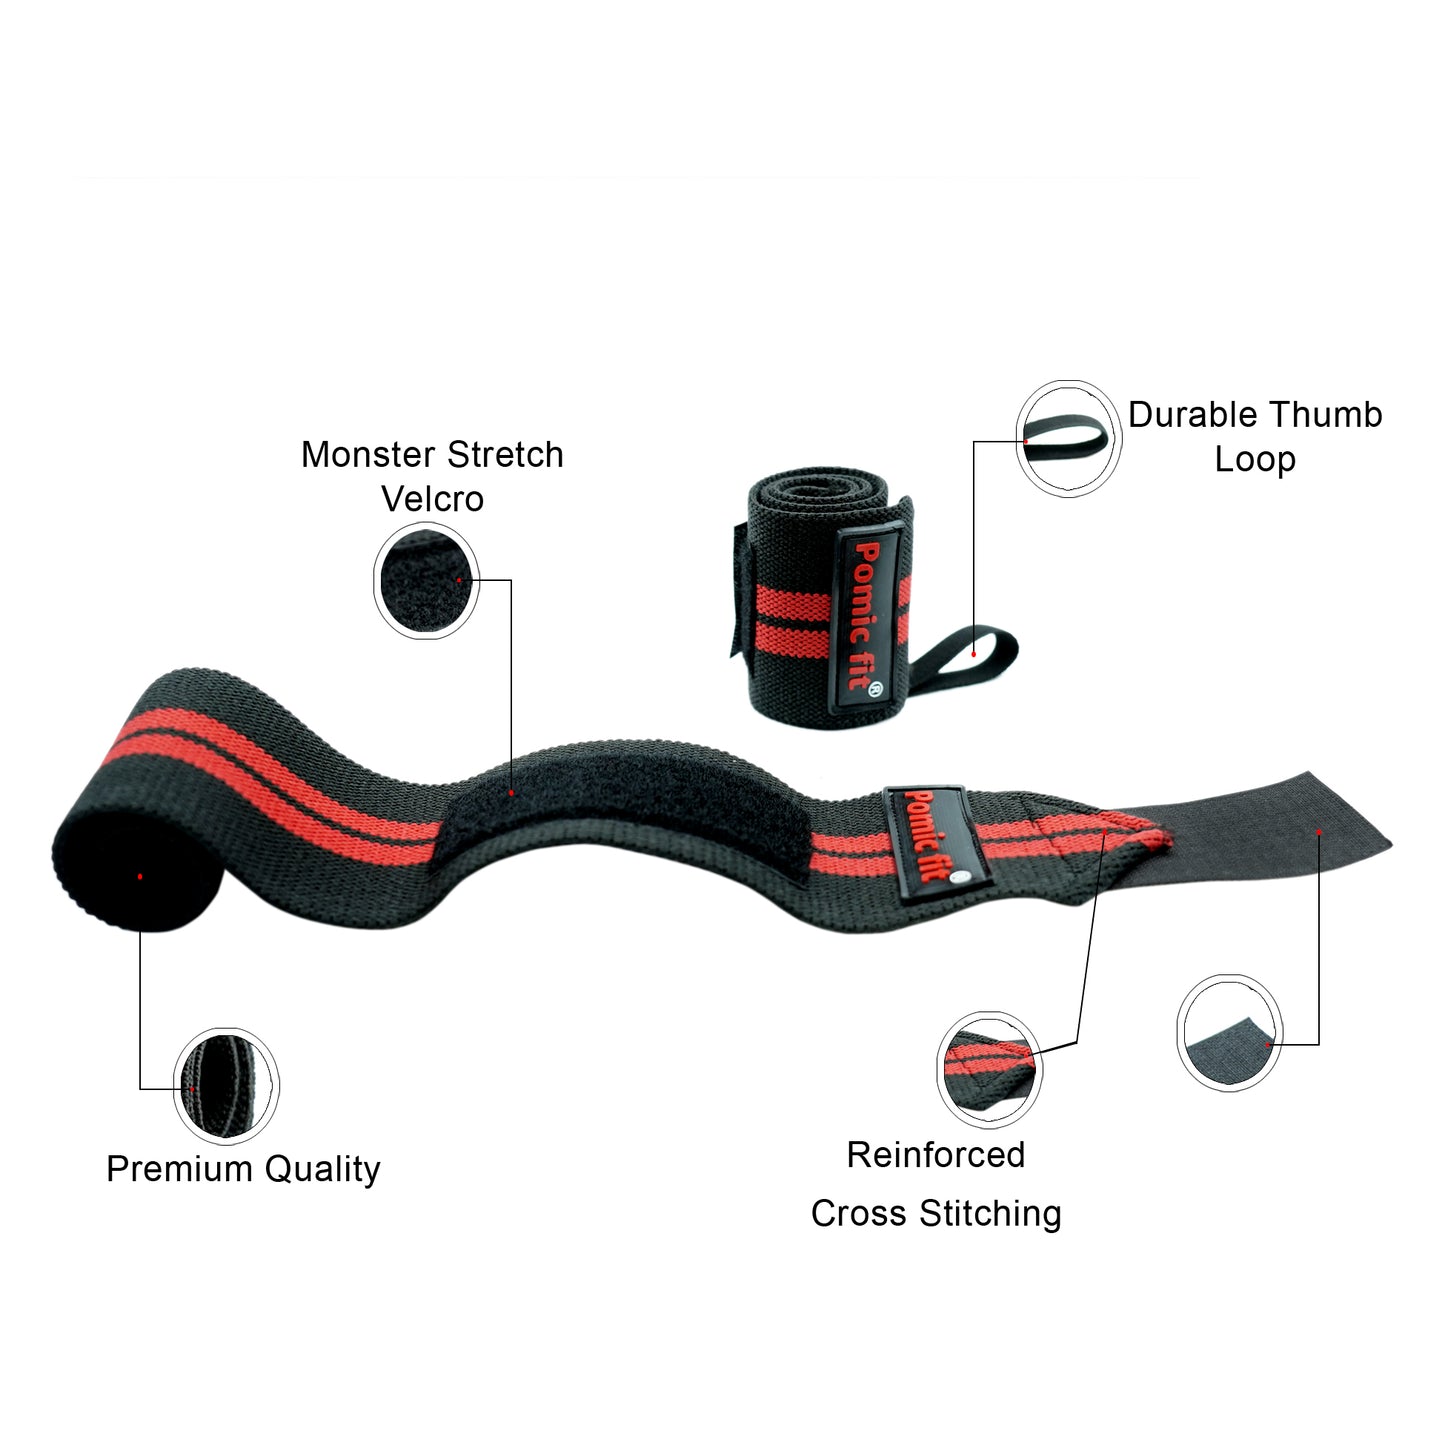 Wrist Support Gym Band Strap Black & Red